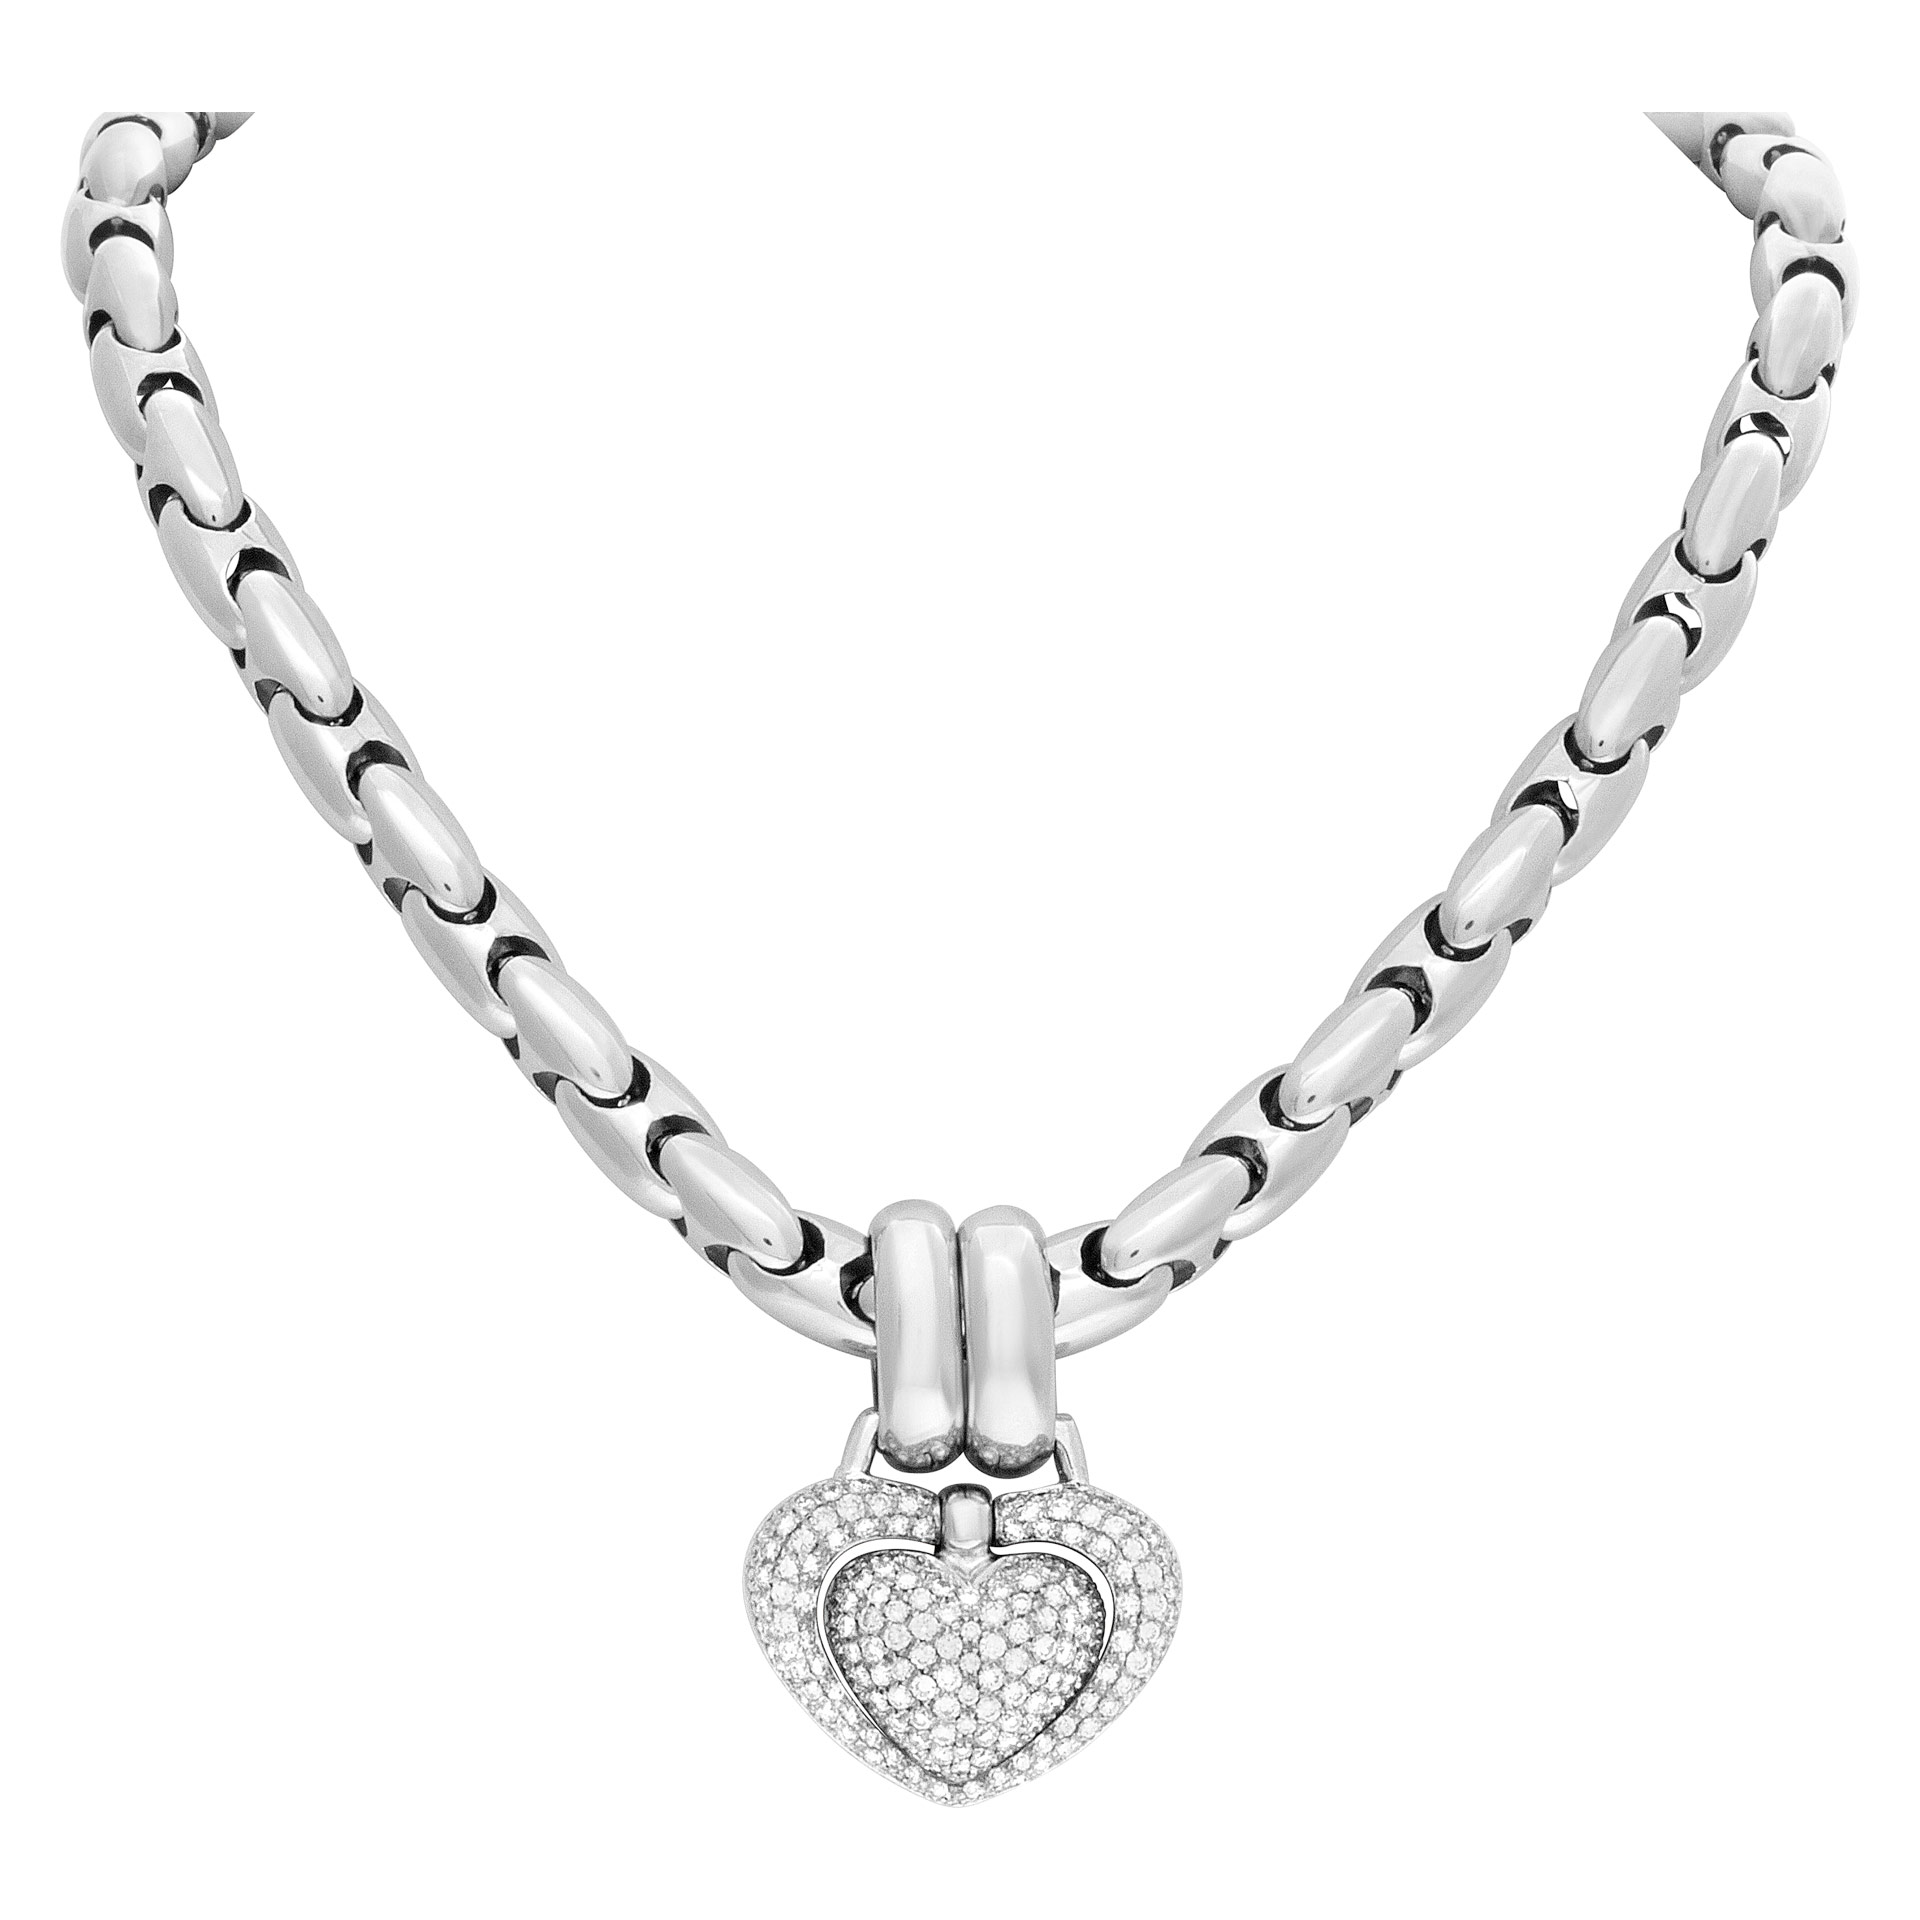 Chimento necklace in 18k white gold 2.50 cts in diamonds (G-H color, VS clarity)